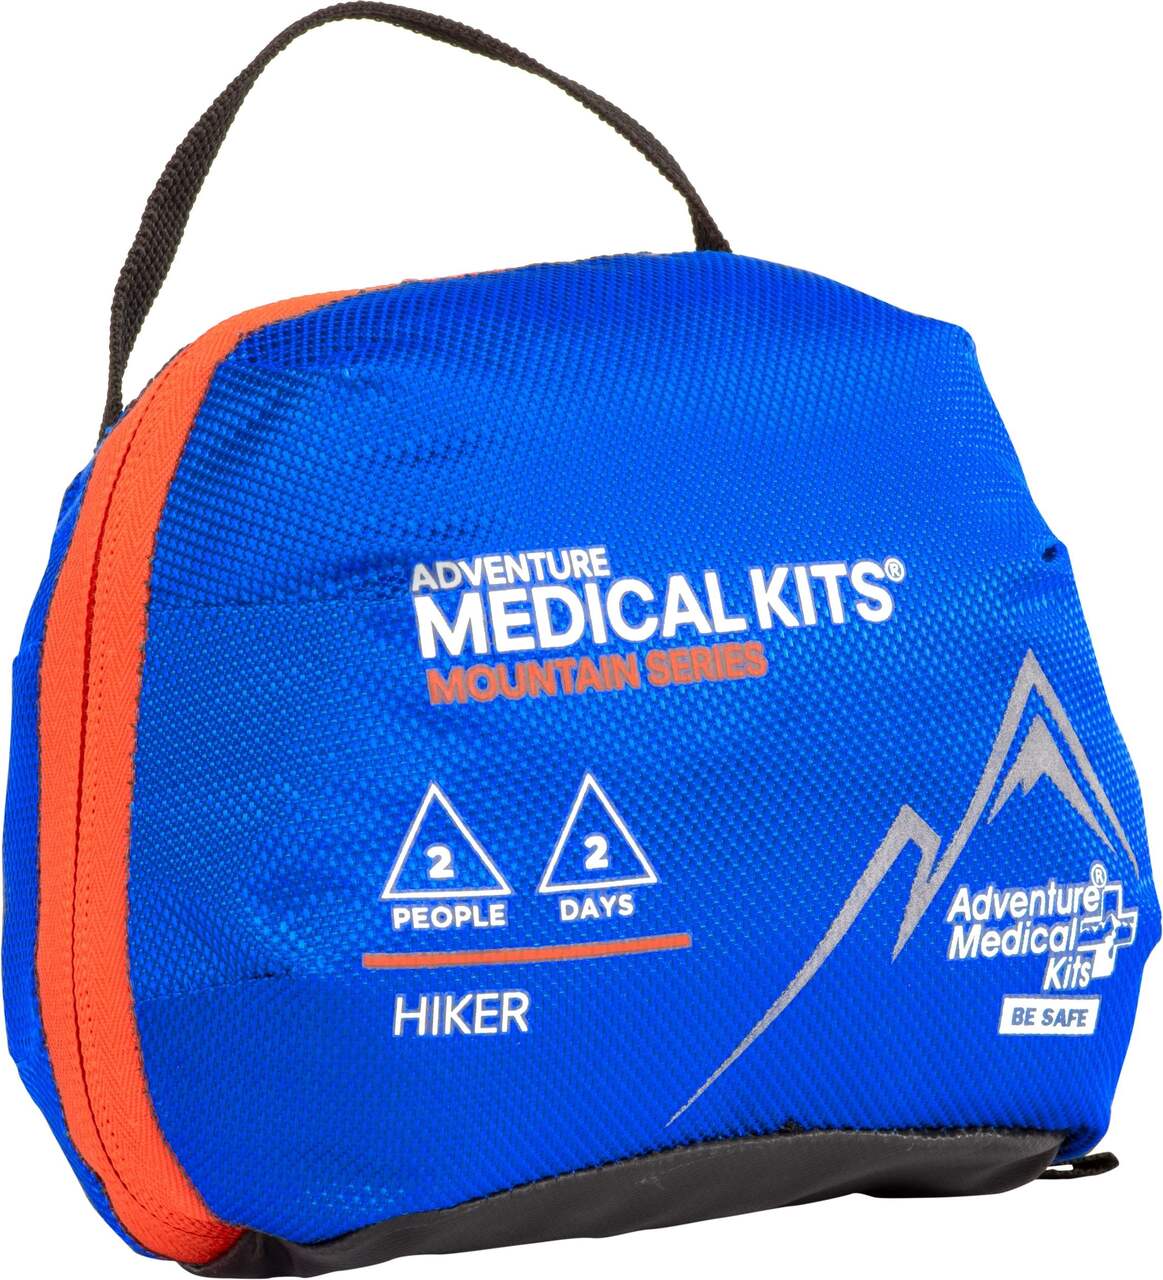 Adventure Medical Kits Mountain Series Hiker 2-Day First Aid Kit, Injury & Survival  Supplies, 2-Person